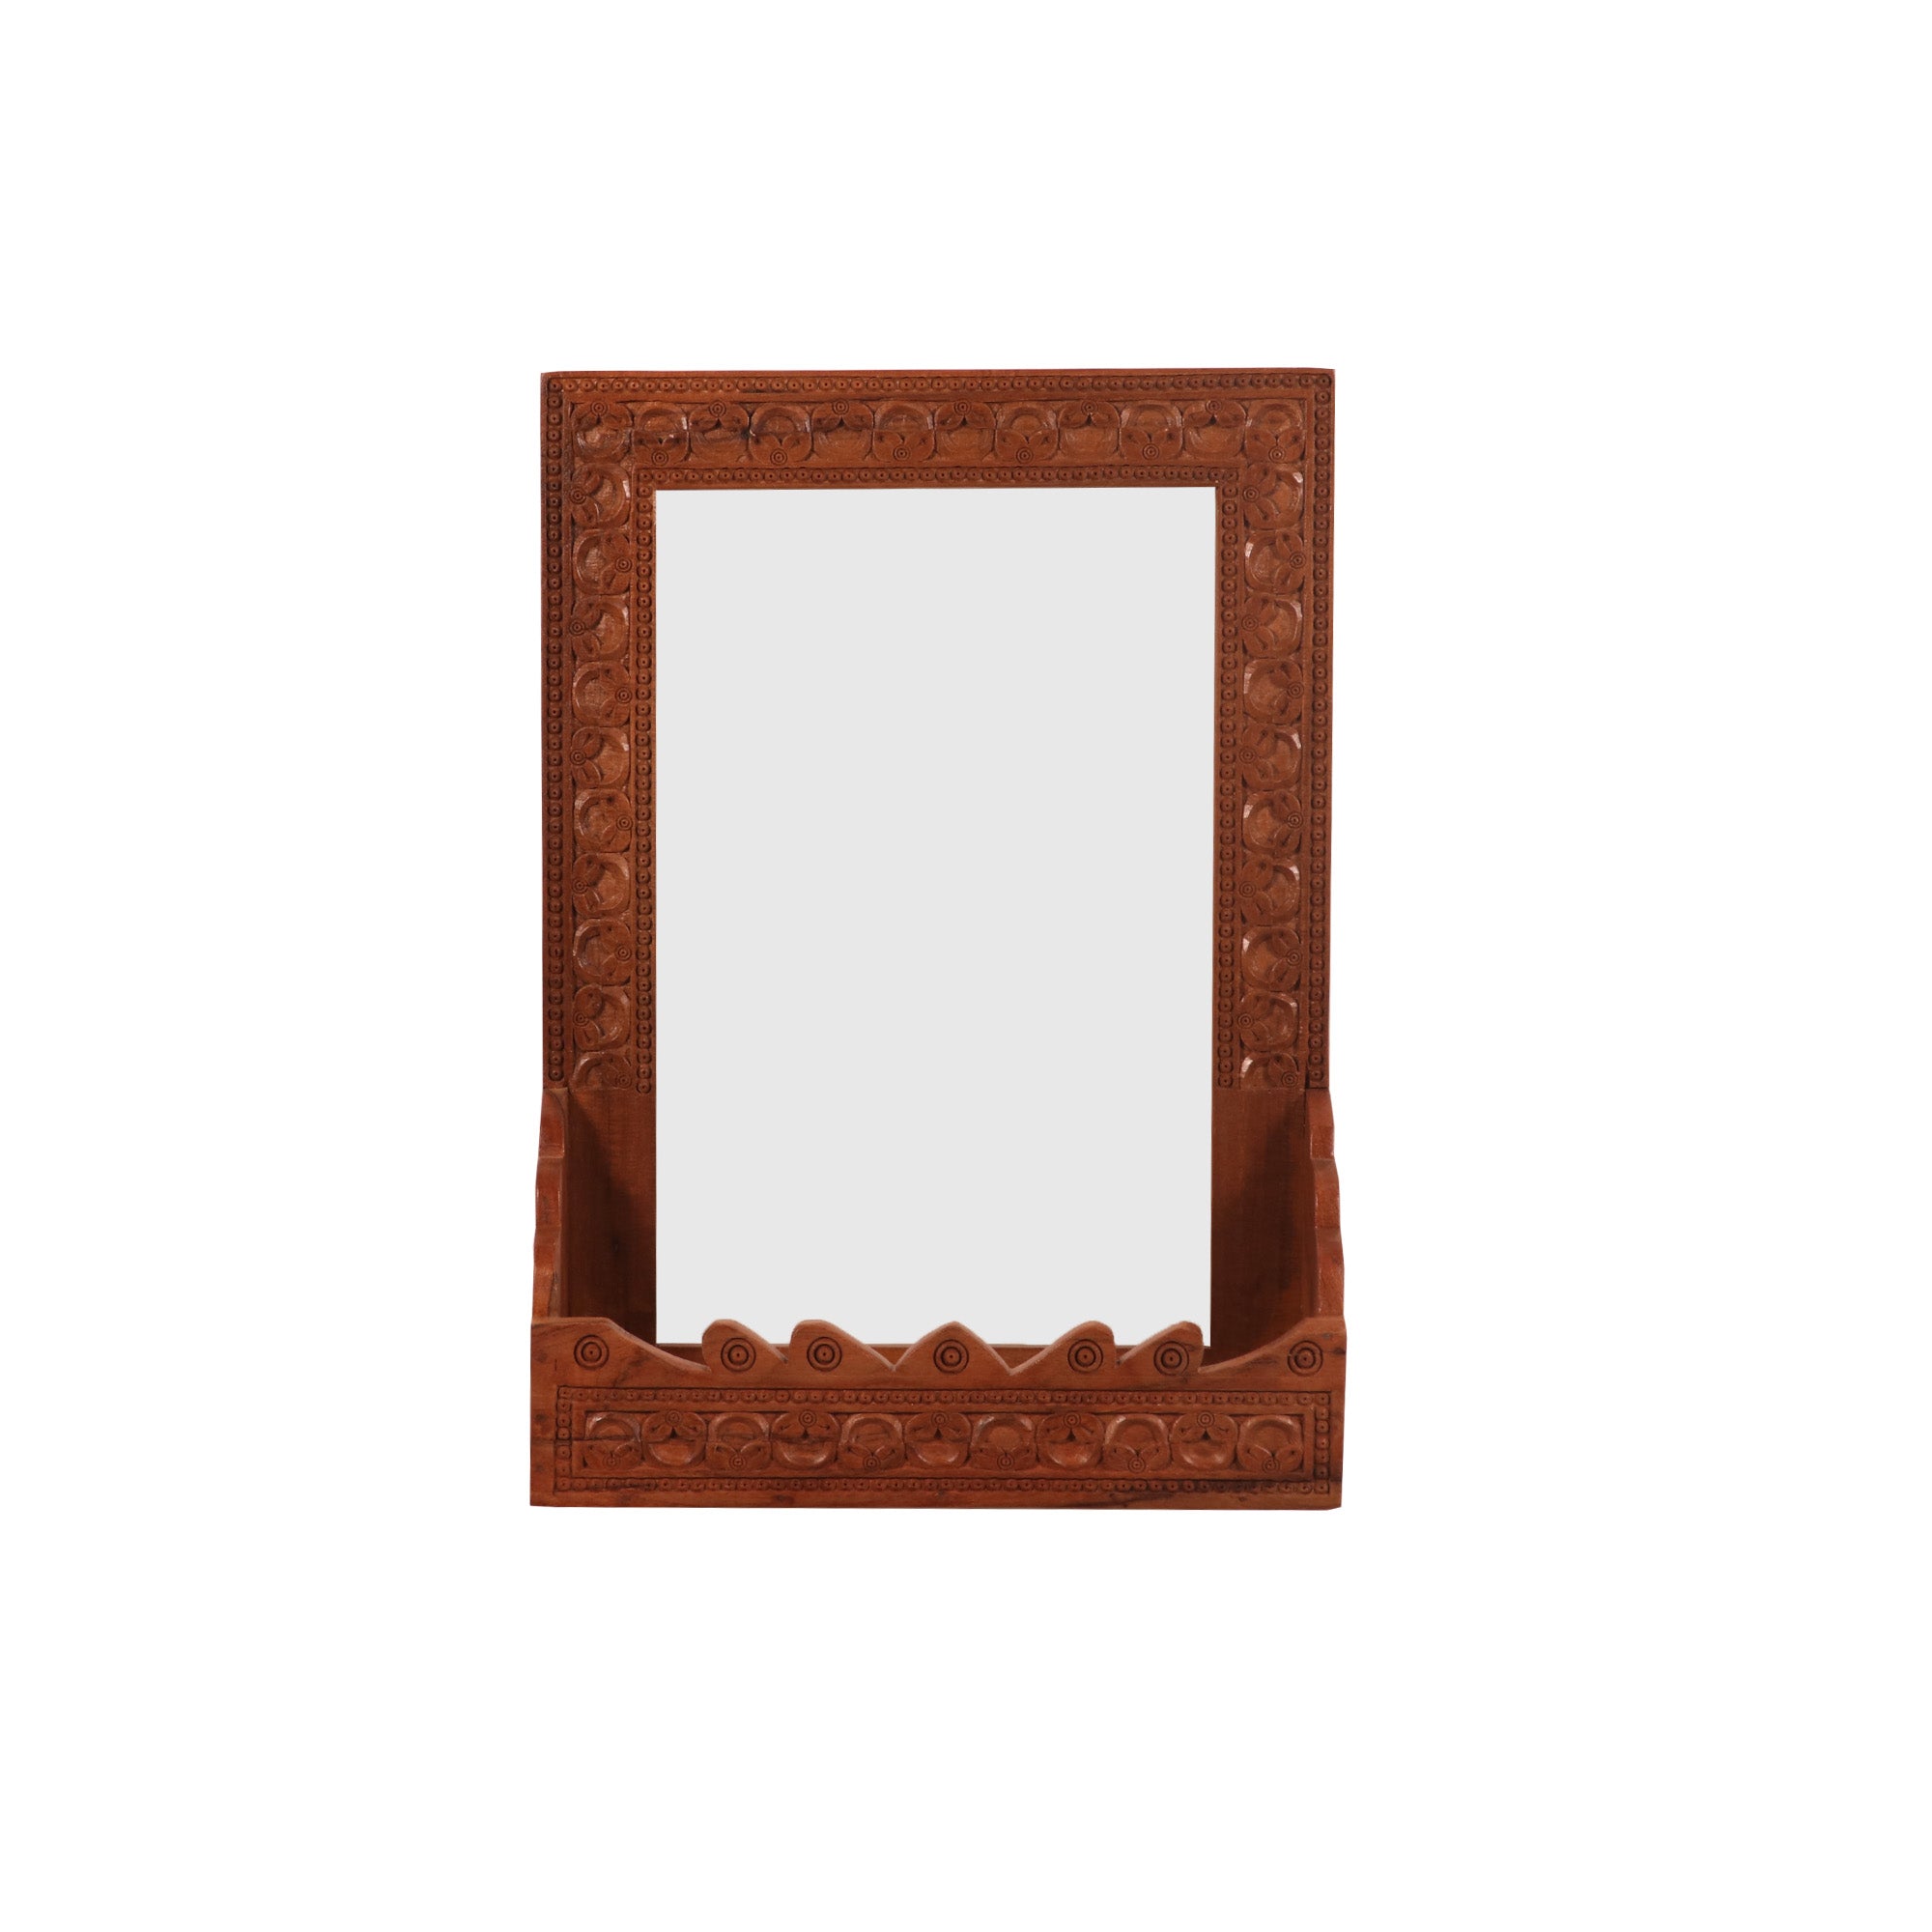 Beautifully Carved mirror with Shelf Mirror